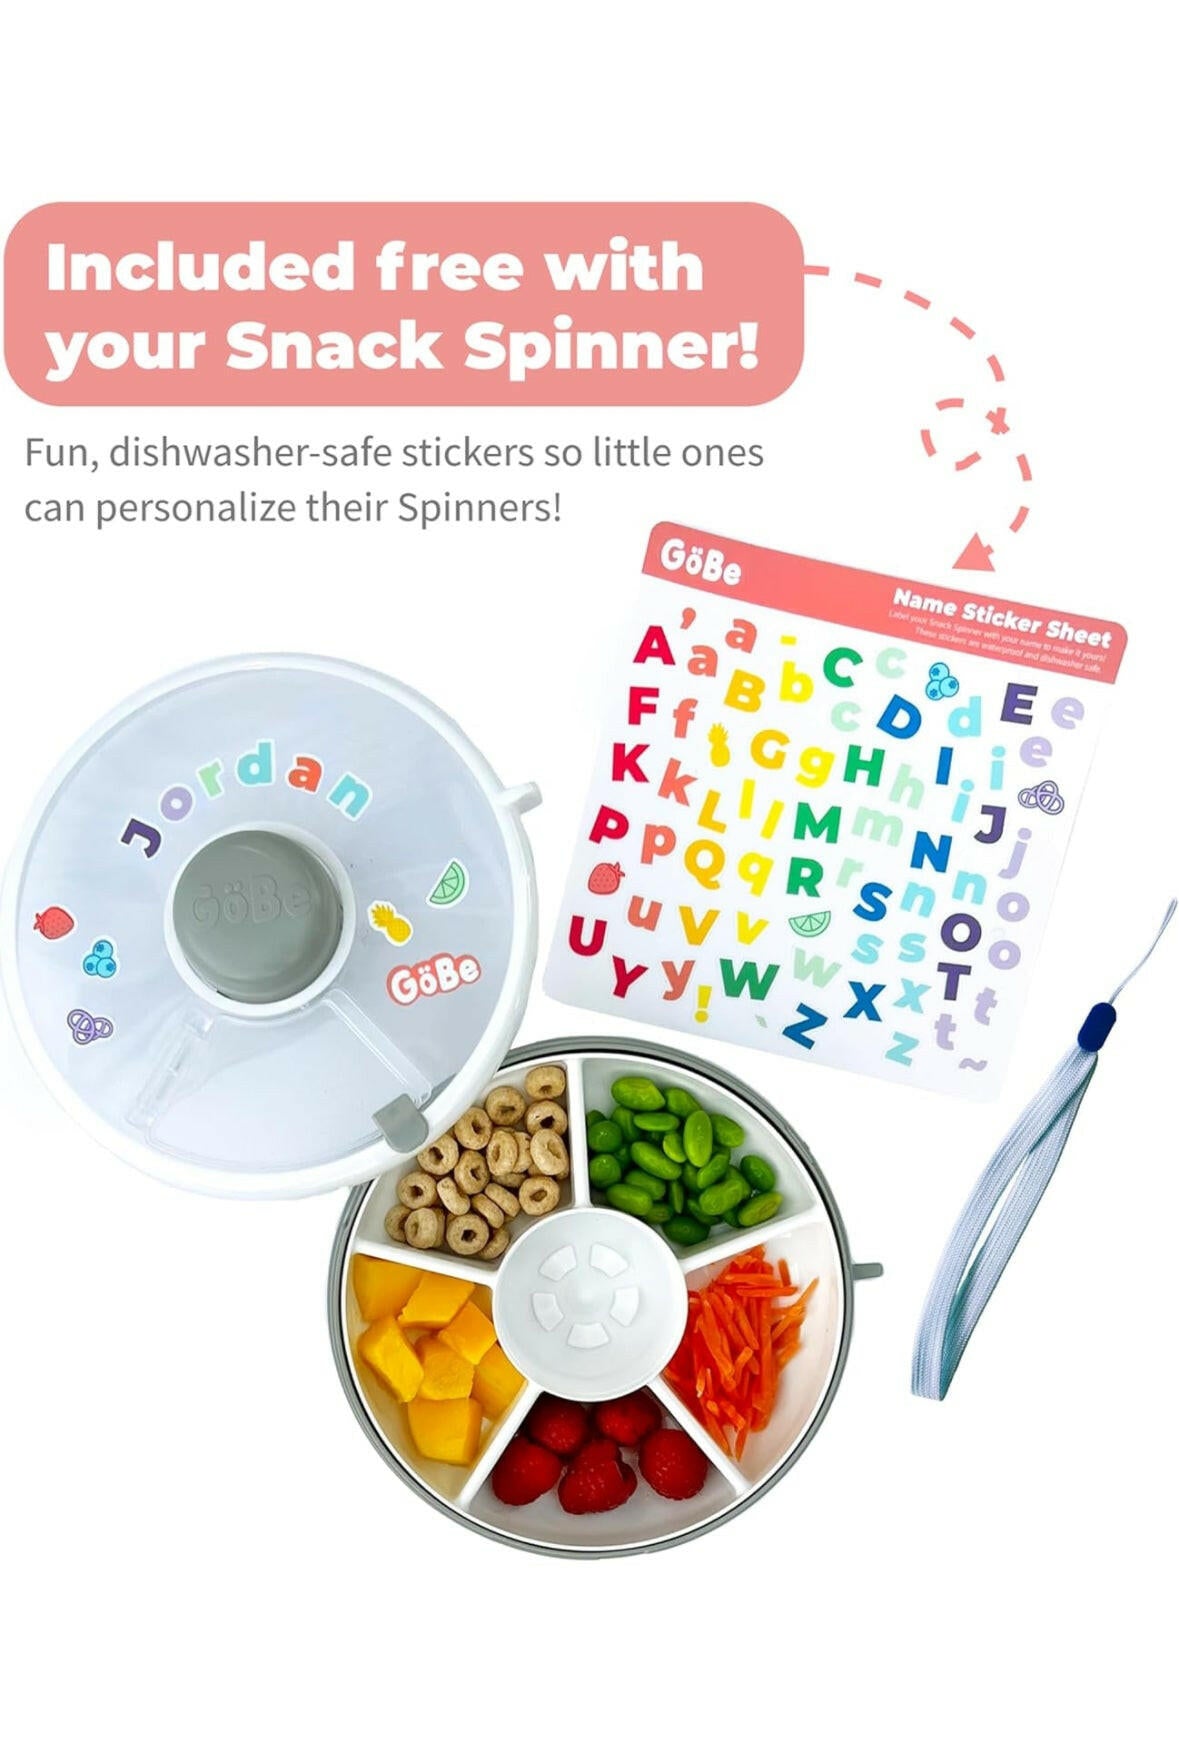 GoBe Snack Spinner Bundle with Hand Strap and Sticker Sheet ,5 Compartment Dispenser and Lid